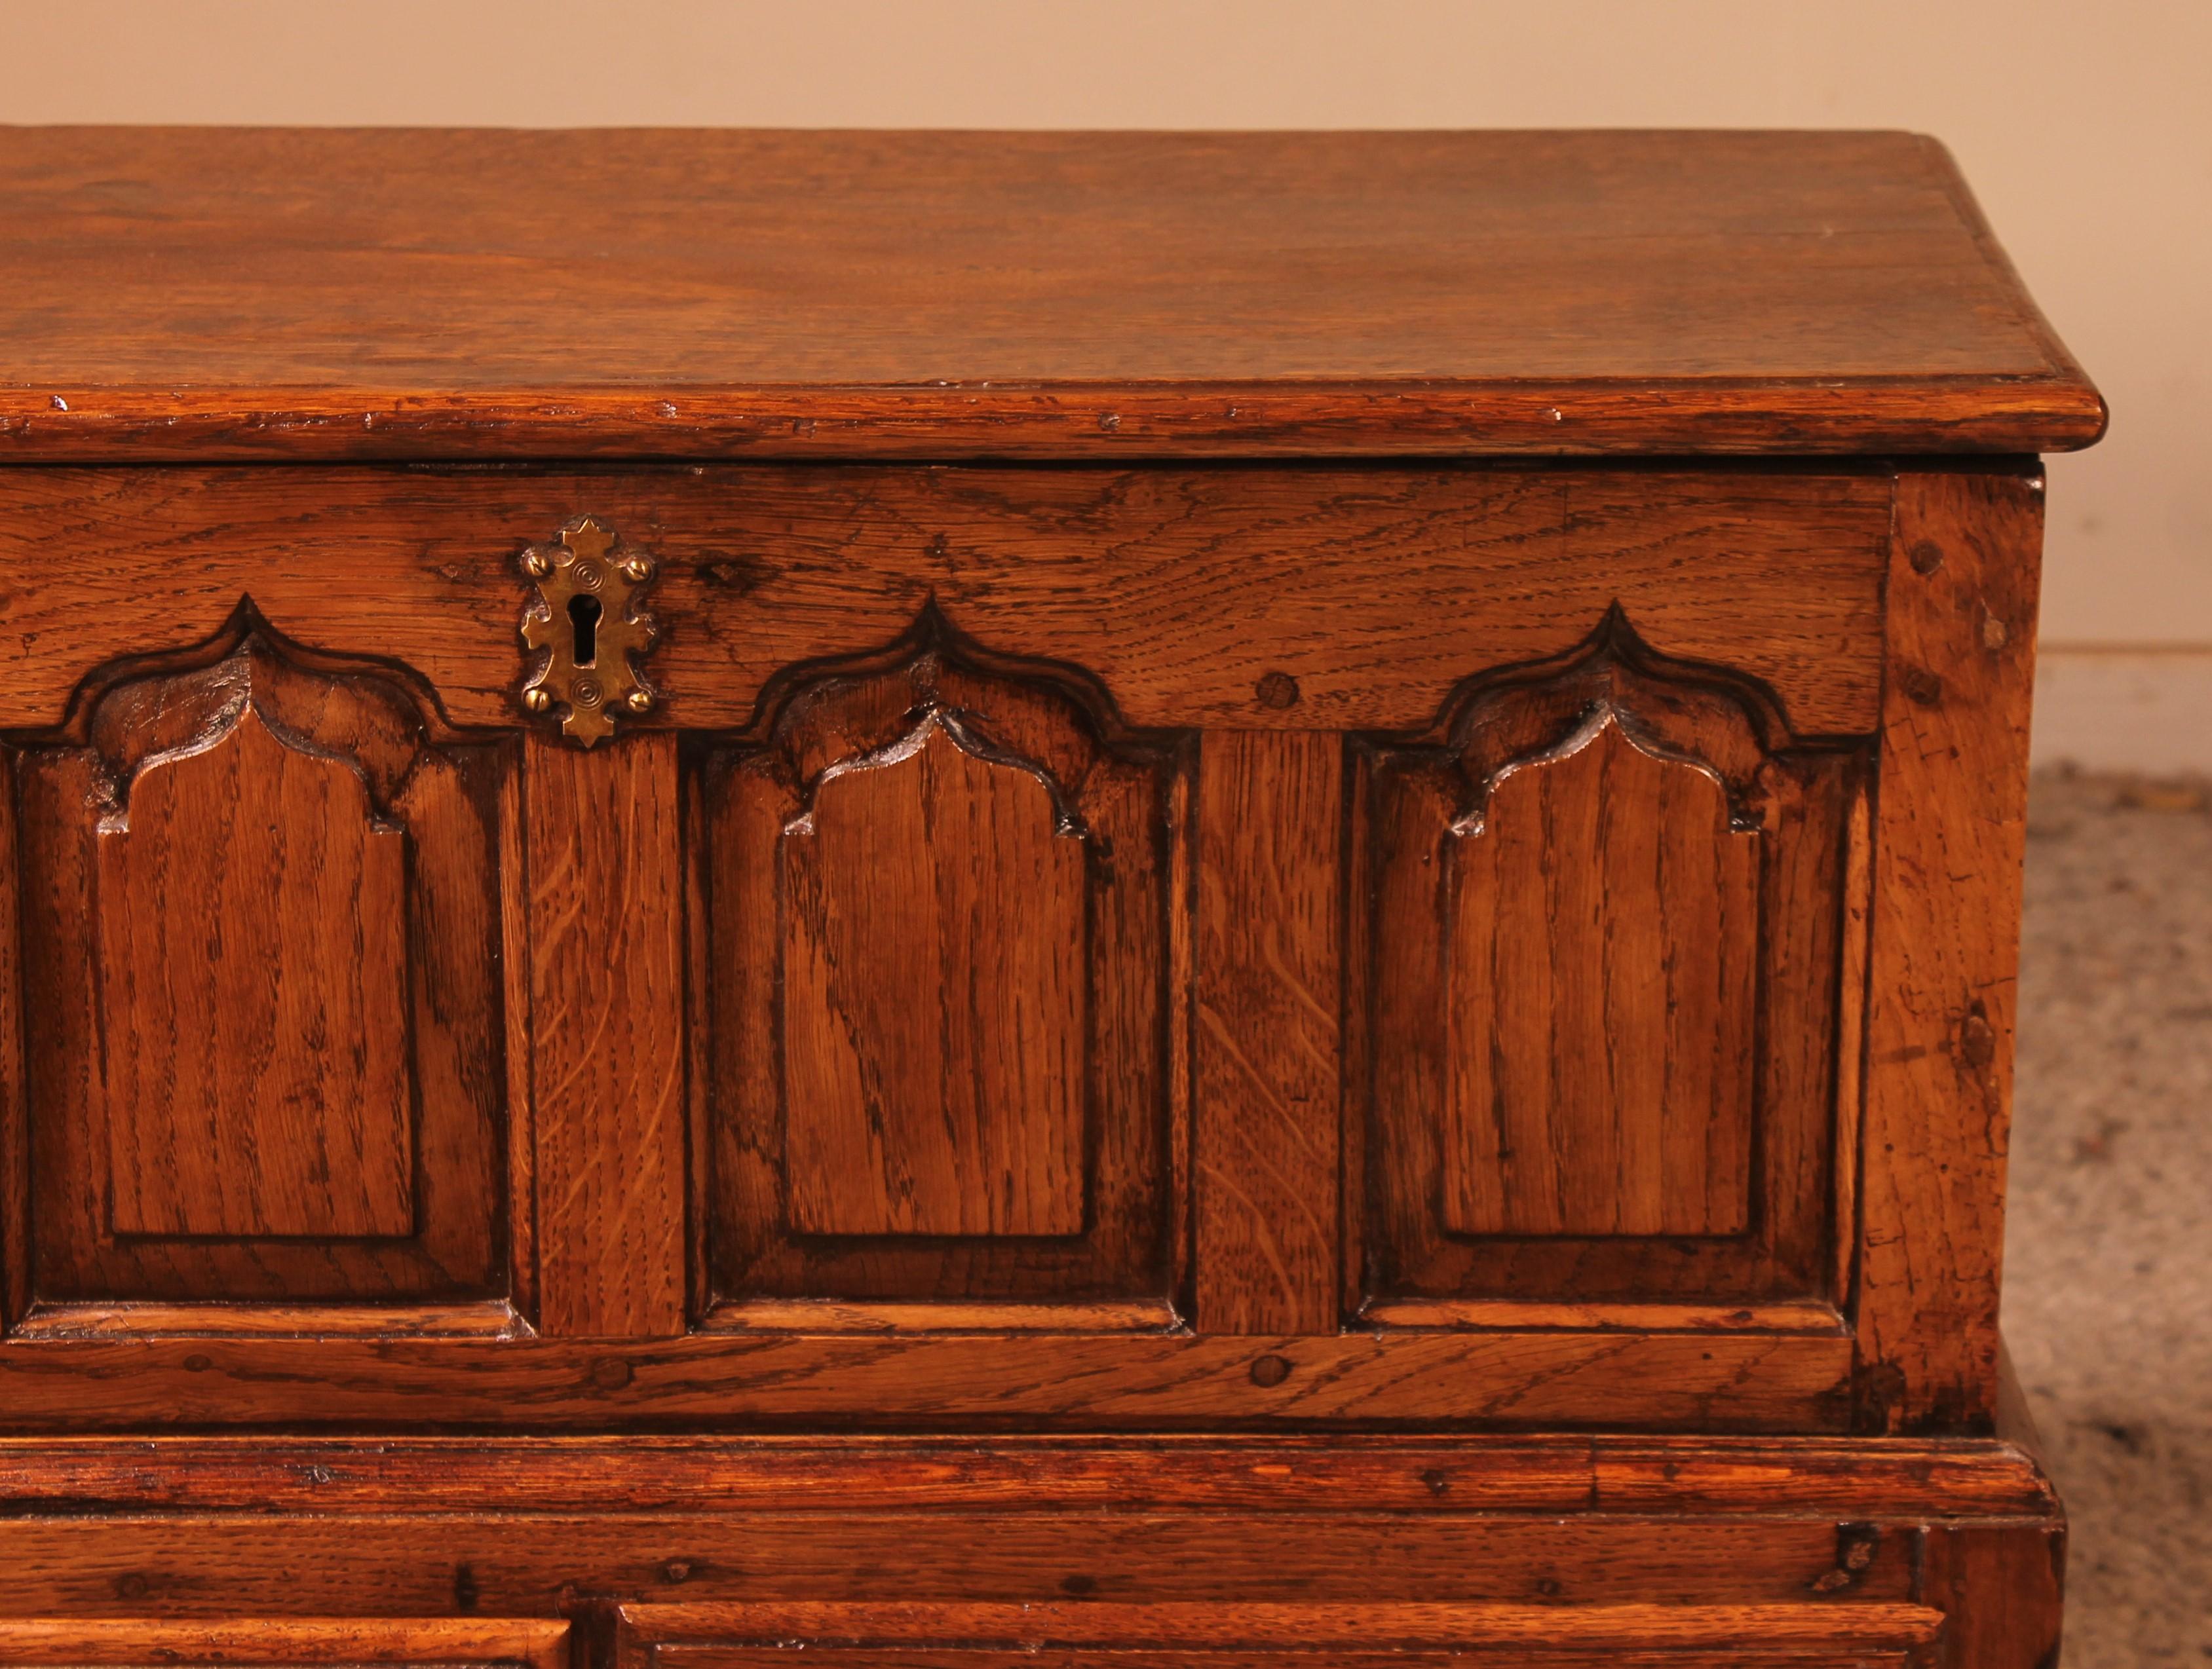 Lovely little English chest from the 18th century in oak
Very nice little chest with very interesting dimensions and a superb sculpted face
This chest has two drawers at the bottom as well as a rather curious closing mechanism. Indeed, it does not